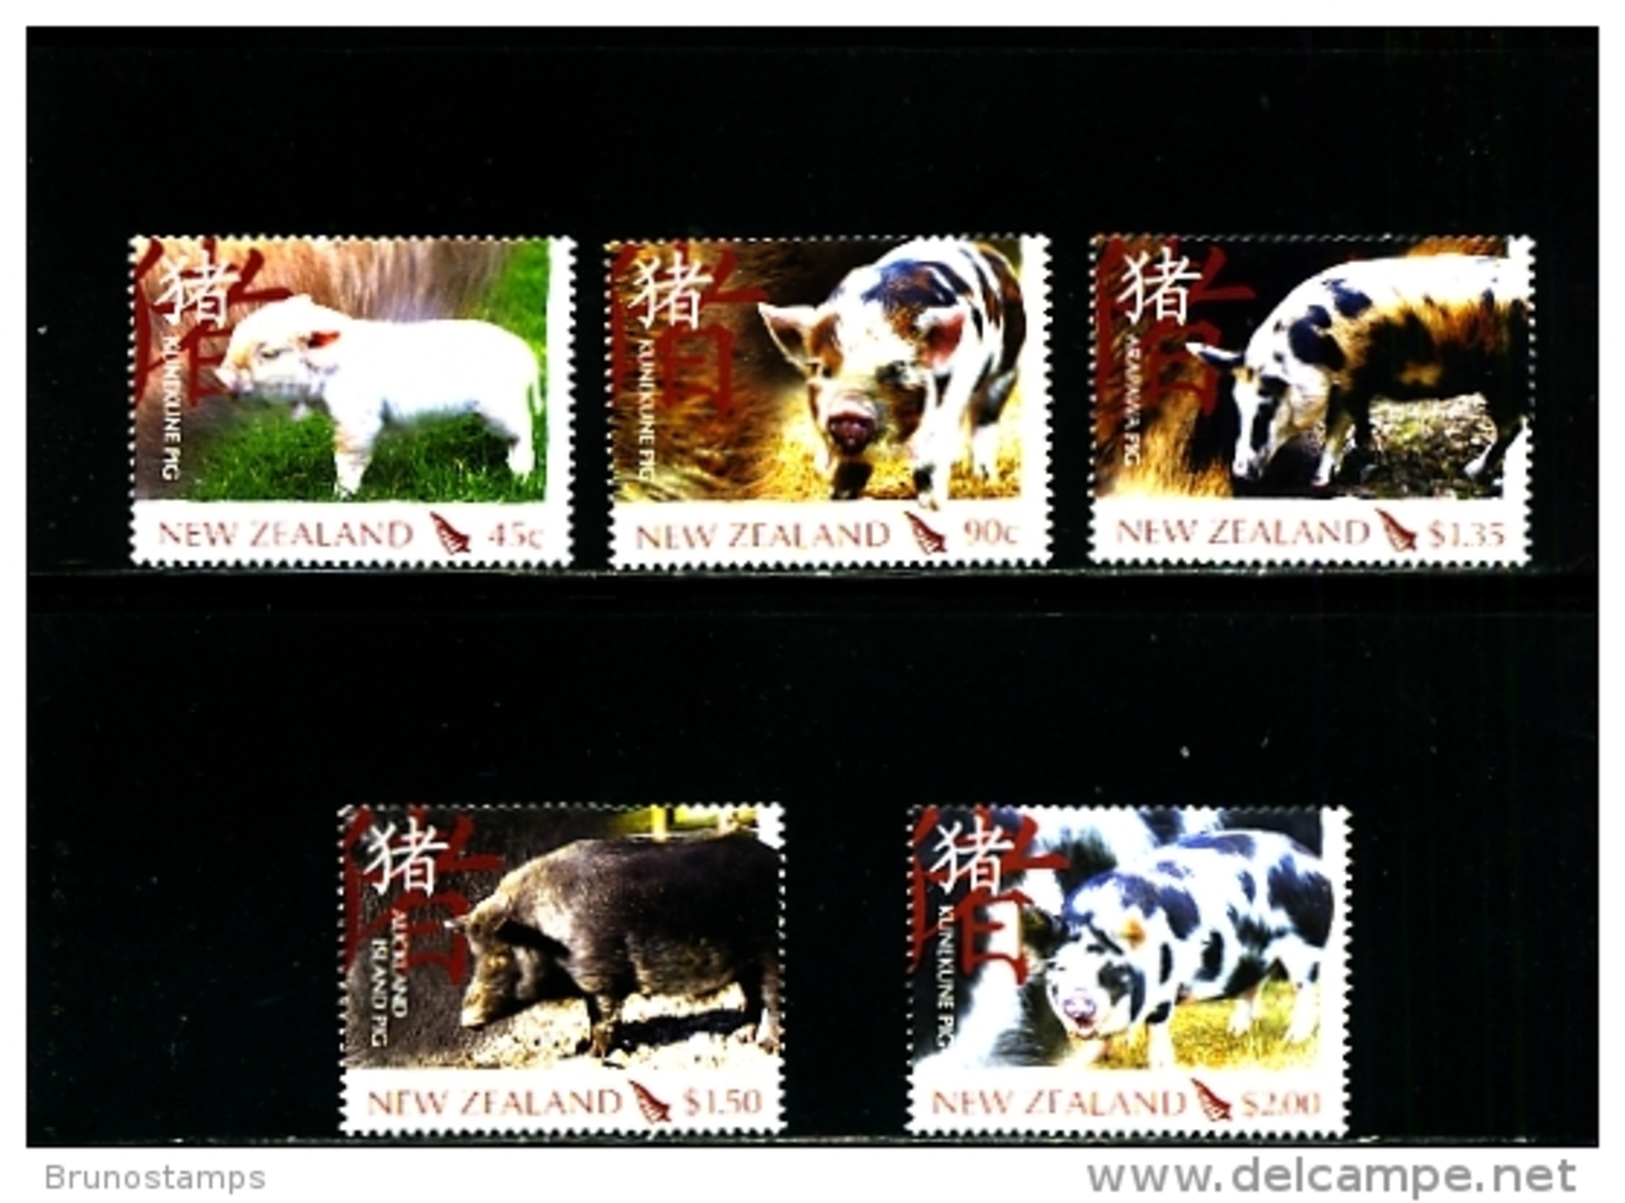 NEW ZEALAND - 2007  YEAR OF THE PIG  SET  MINT NH - Nuovi